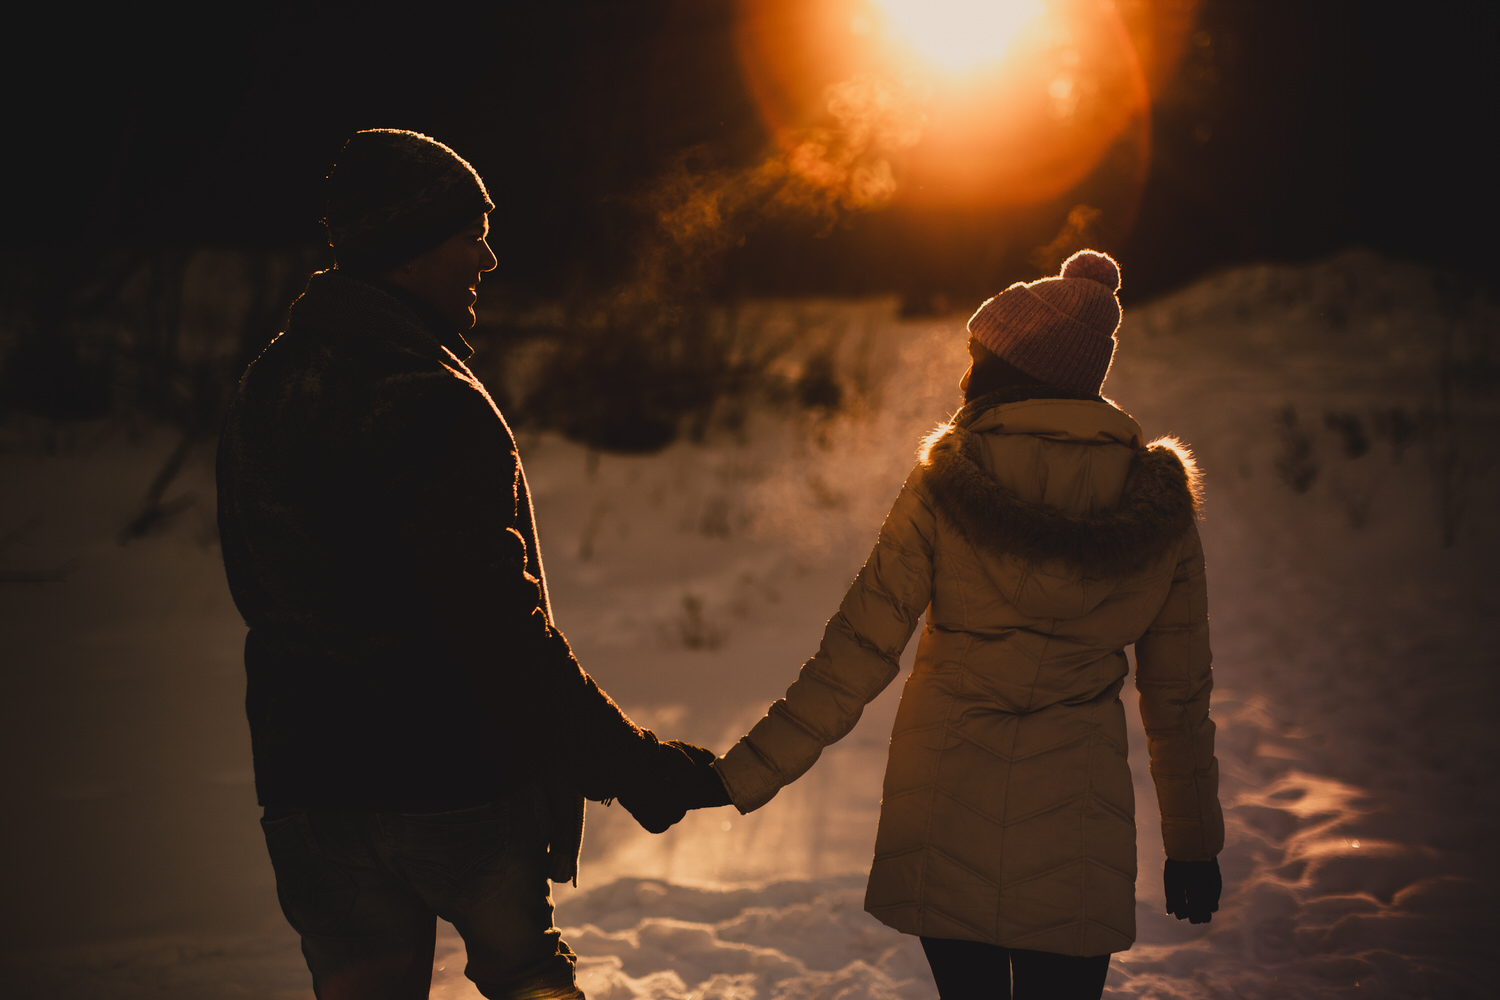 An engaged couple holding hands in Calgary during sunset in the winter